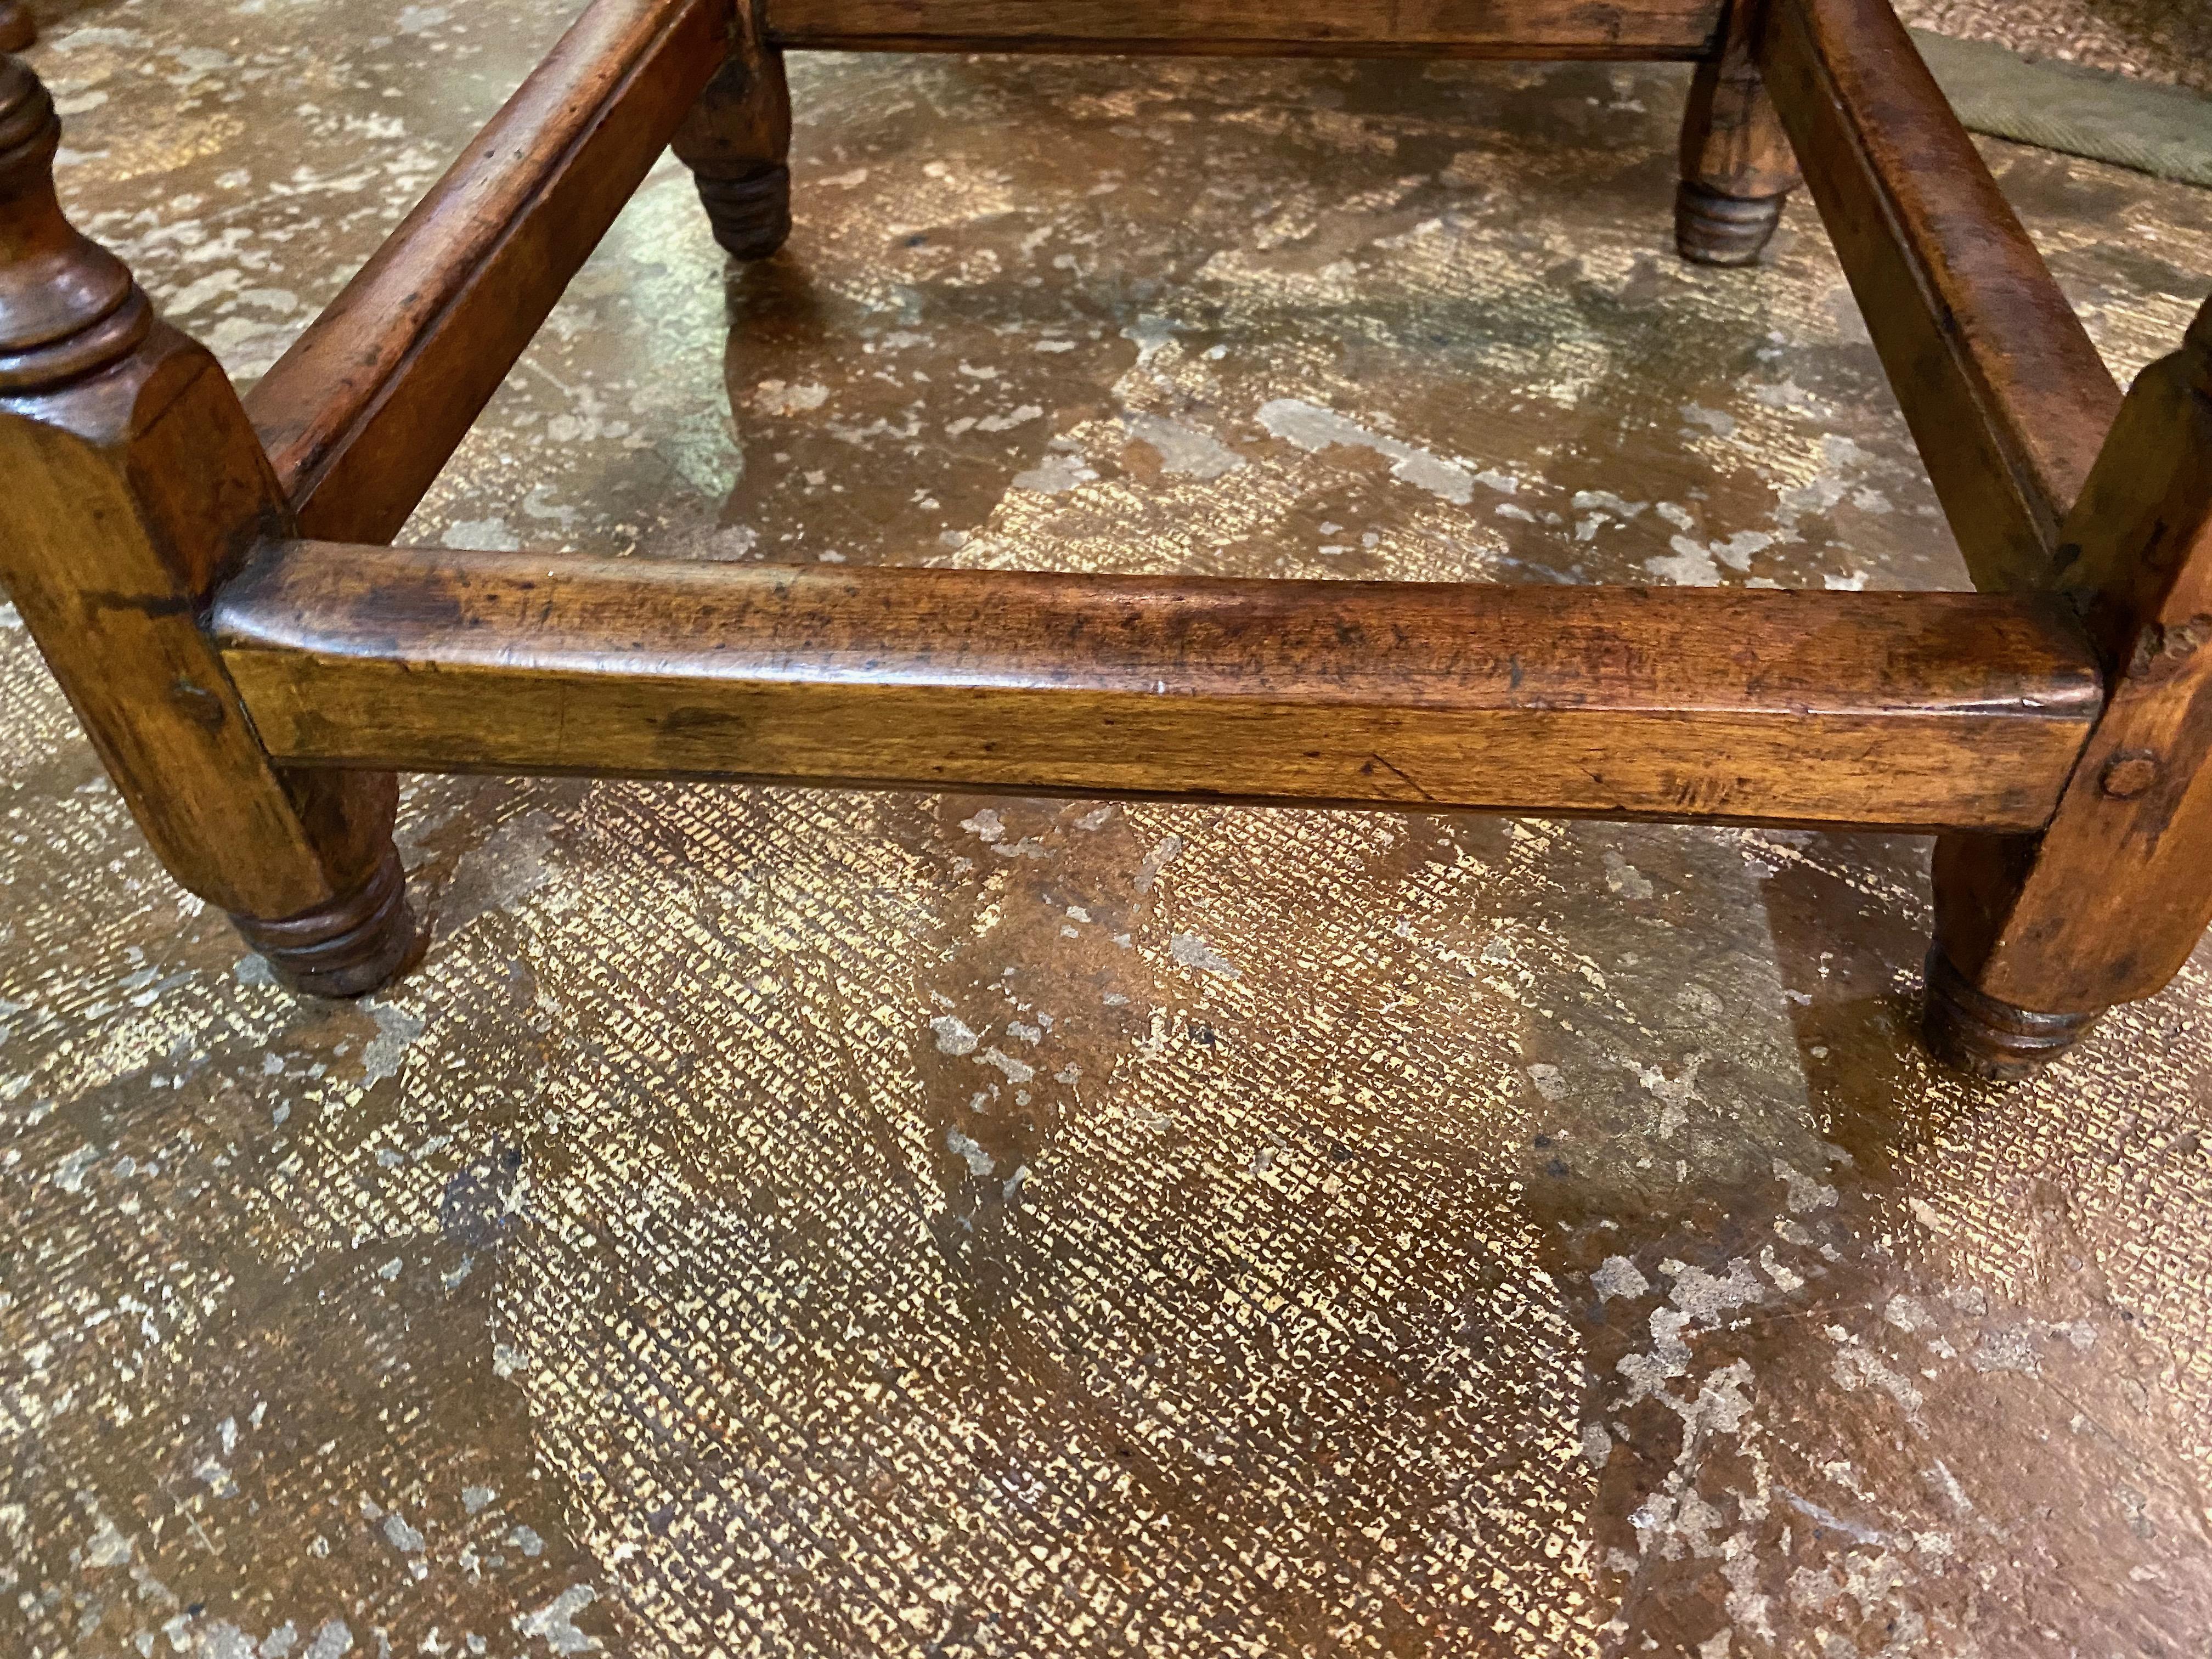 This is a classic small New England mid-18th century tavern table. The table top is pine with breadboard ends; the supporting frame is maple. This type of table was prevalent in Colonial era and was commonly found in taverns and homes. This table is